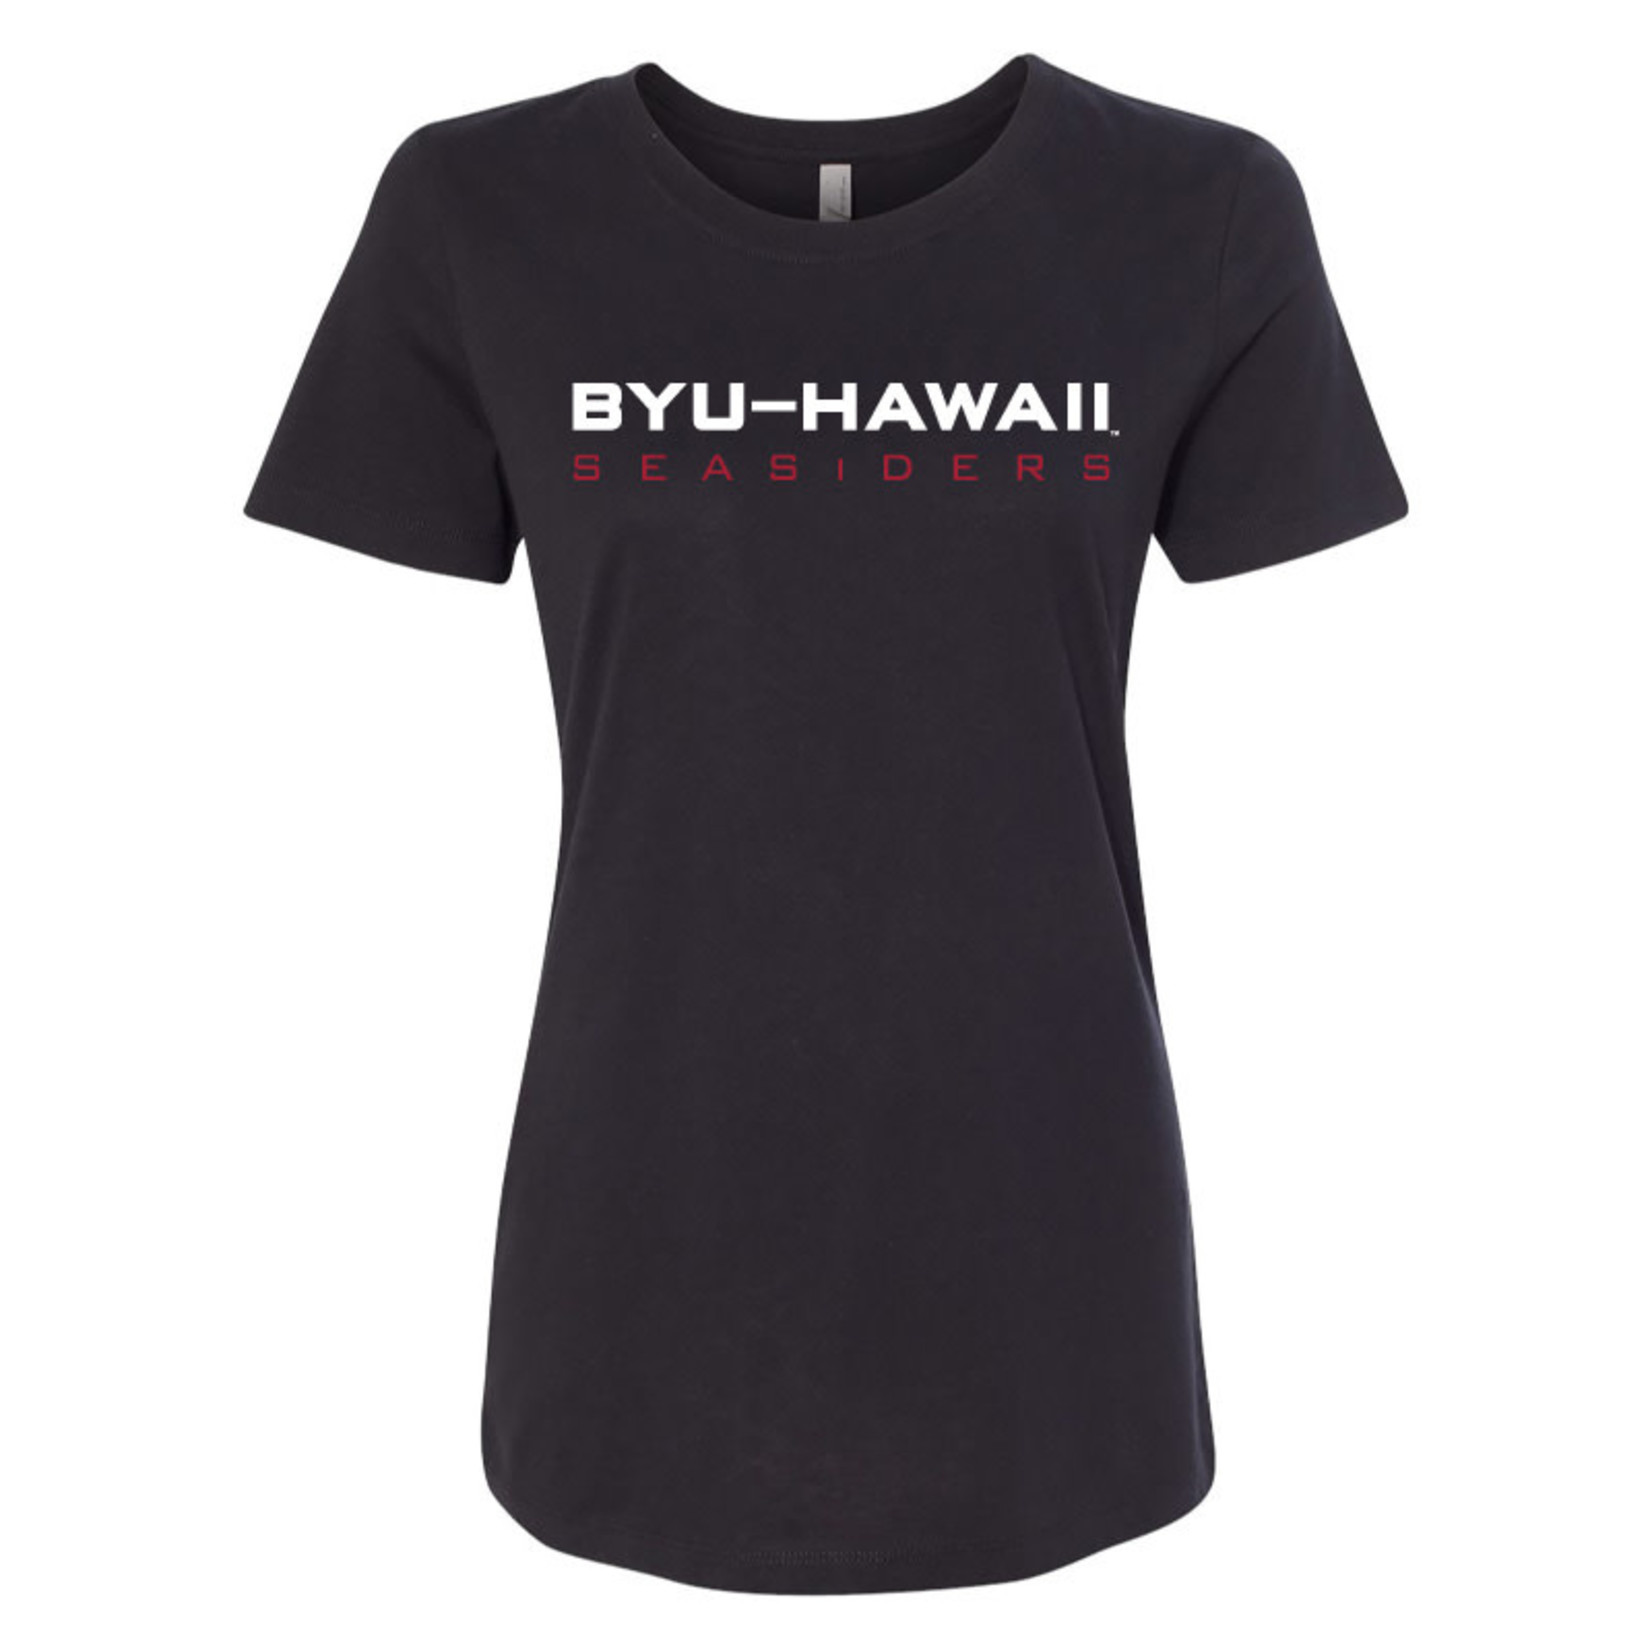 BYU-Hawaii Stacked & Widened - Ideal T